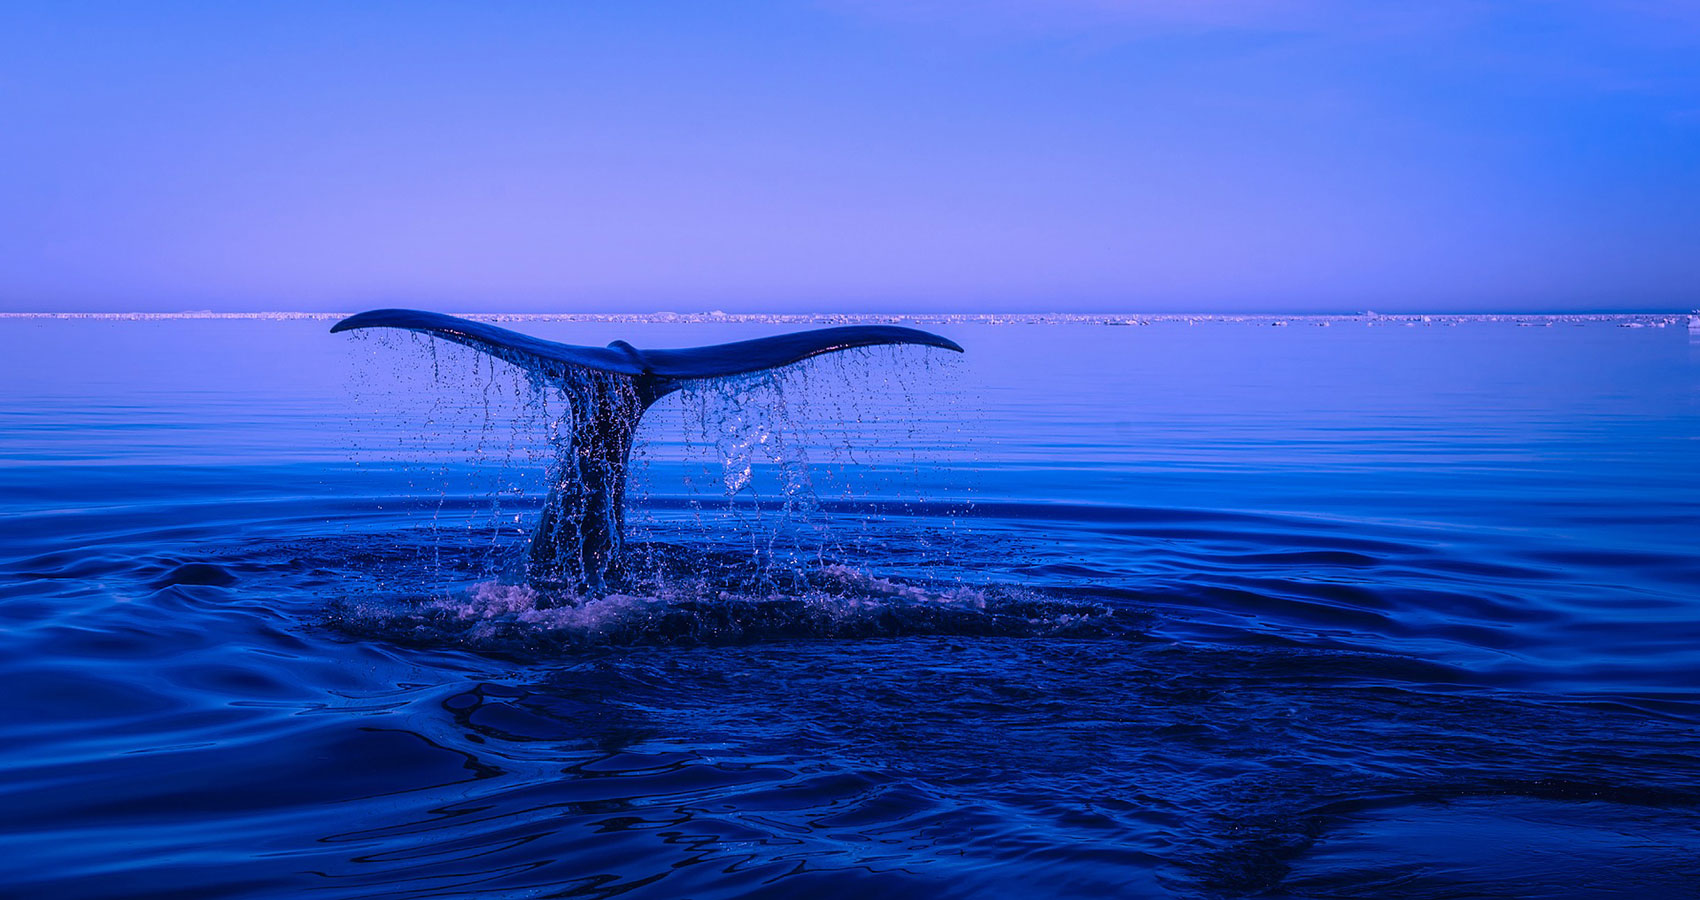 The Whale, poem written by Massimiliano (Max) Bianchi at Spillwords.com